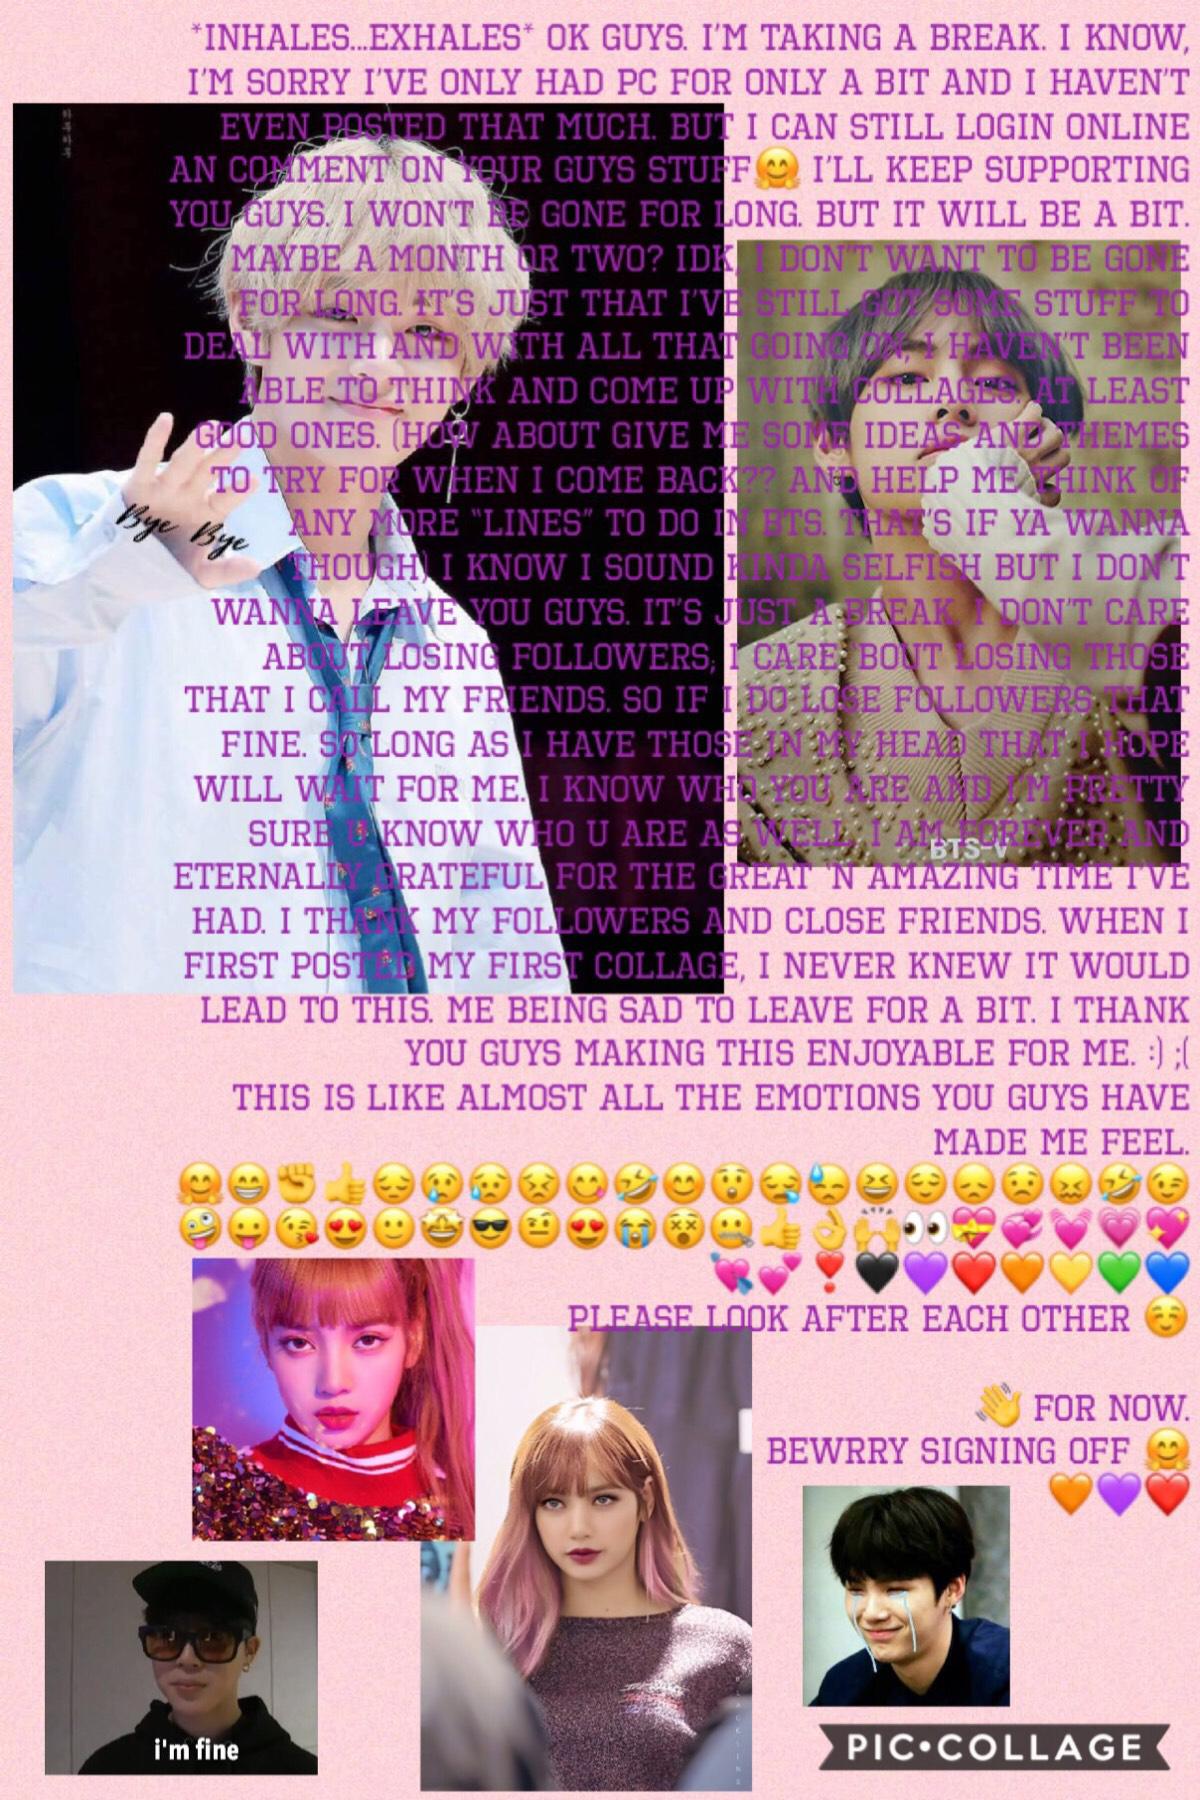 (*^-^*) 
Hopefully u can read all of it and hopefully u read all of it